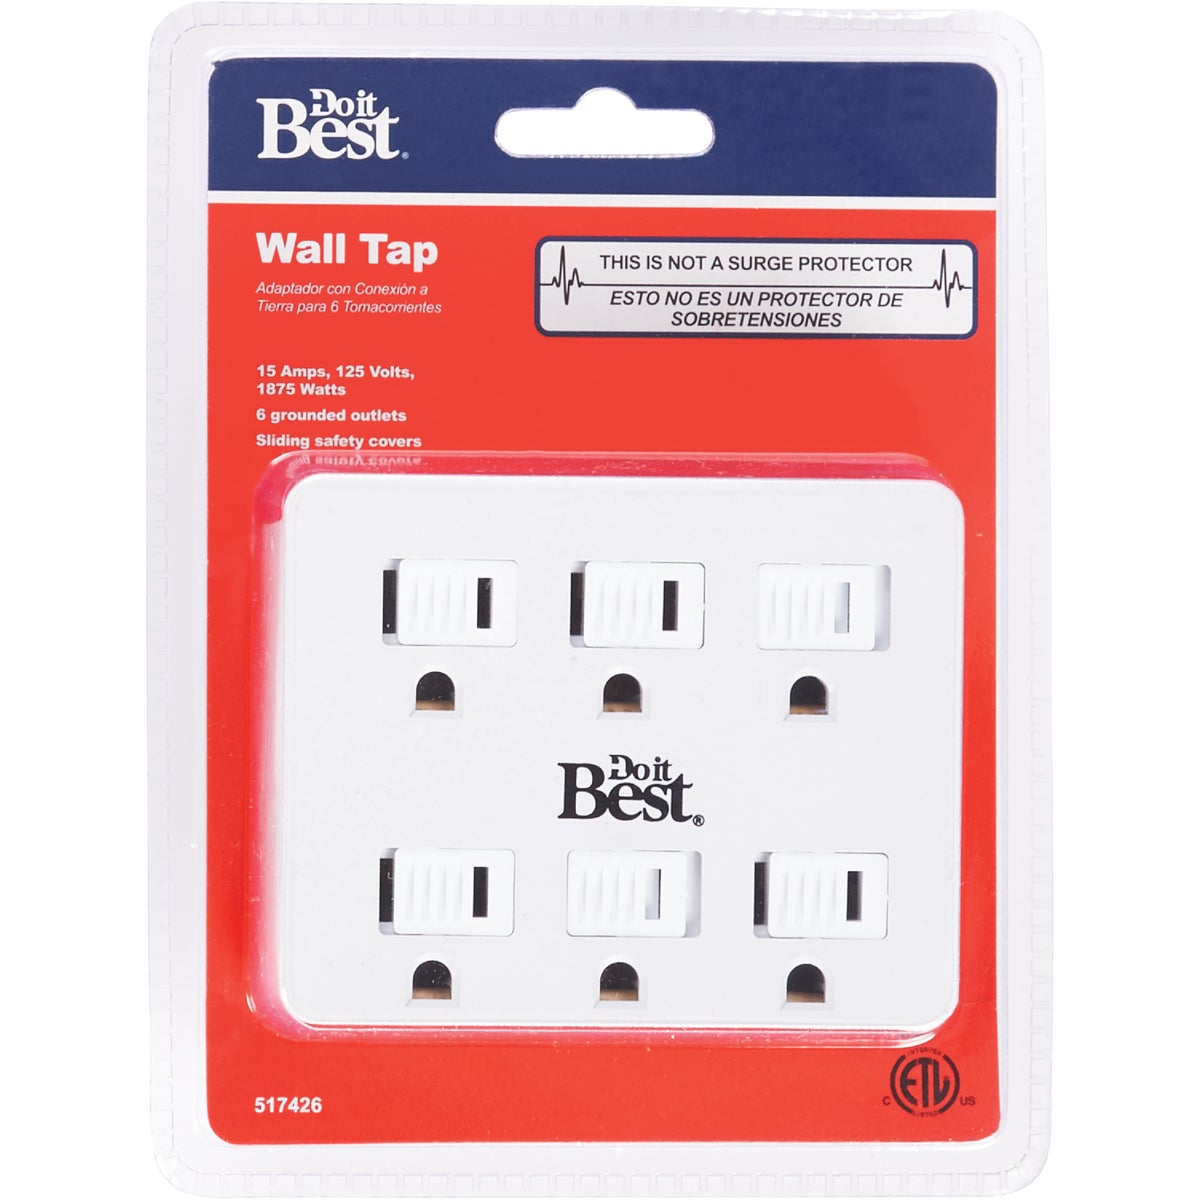 Item 517426, Wall tap outlet includes sliding safety covers and converts 2 outlets to 6 